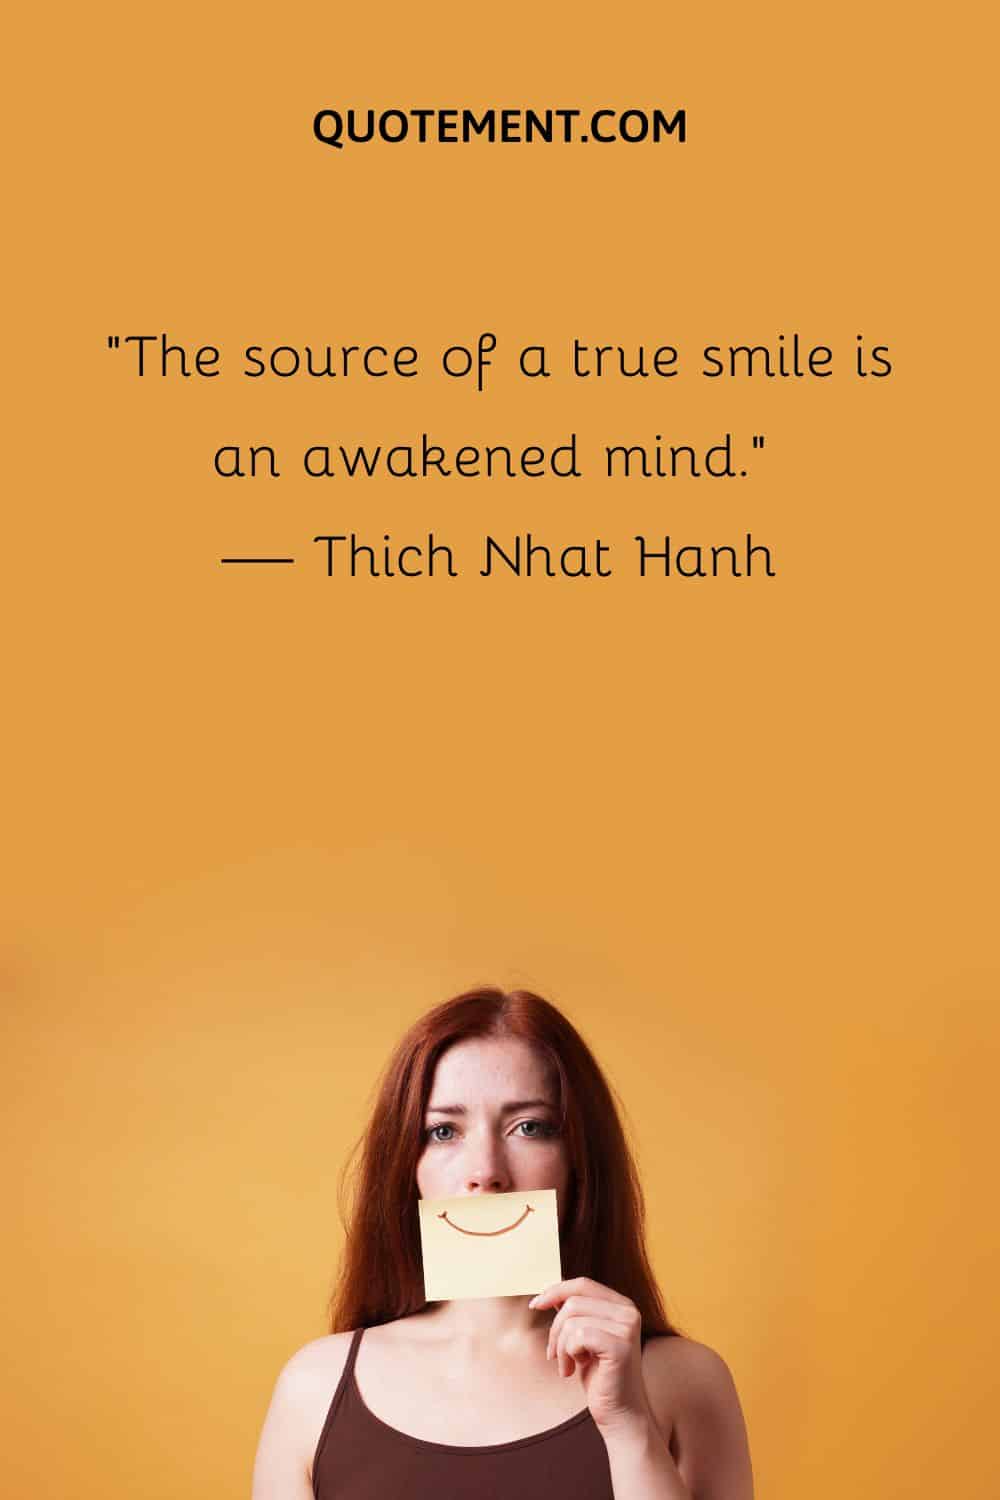 The source of a true smile is an awakened mind.